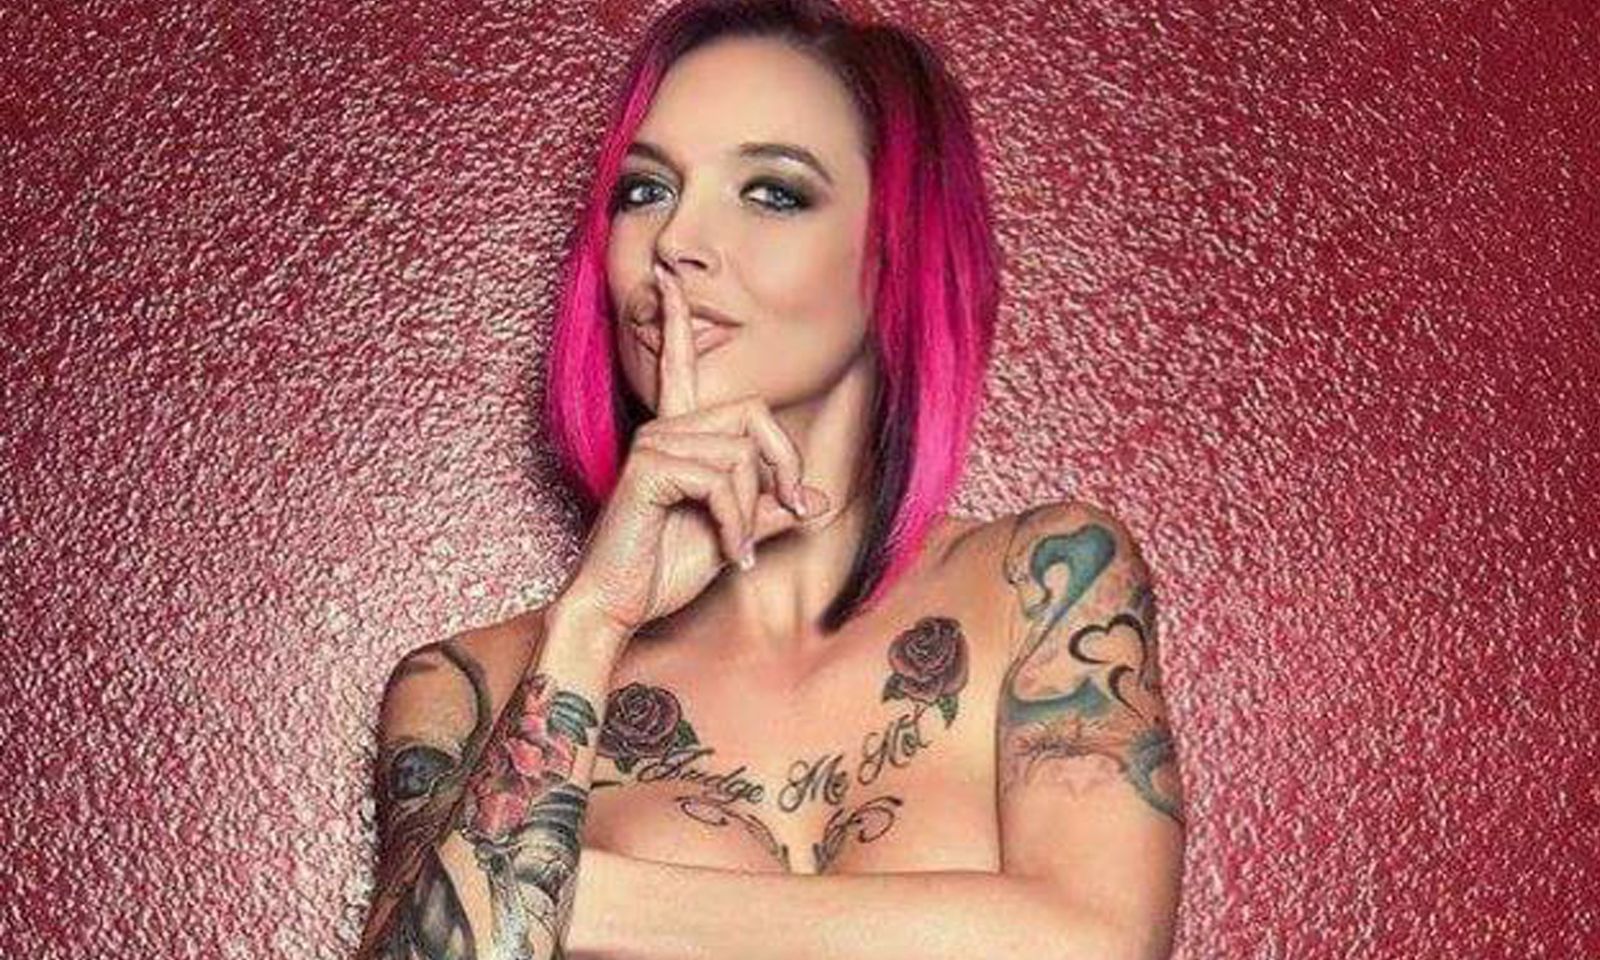 Anna Bell Peaks Stars in ‘Flawless’ from Wicked Pictures